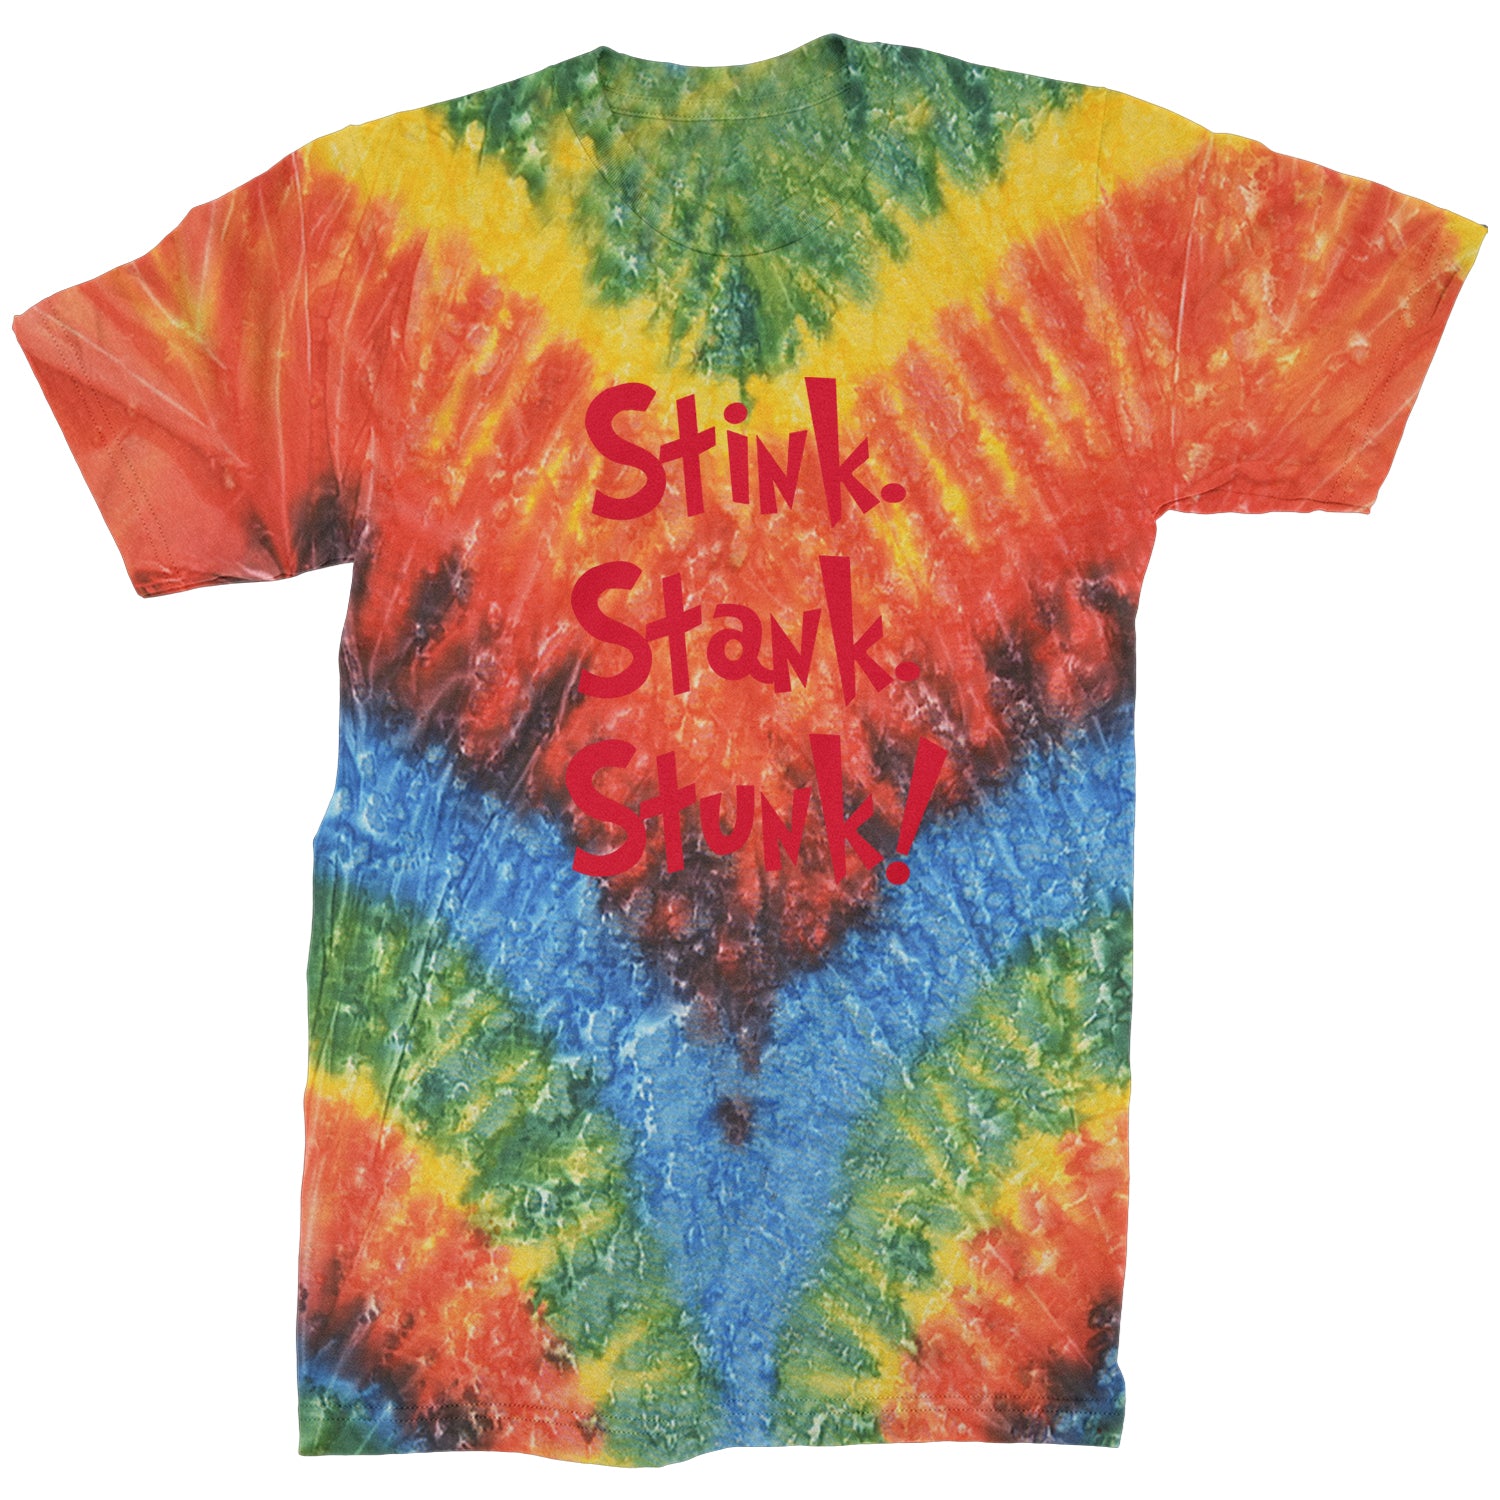 Stink Stank Stunk Grinch Mens T-shirt christmas, holiday, sweater, ugly, xmas by Expression Tees